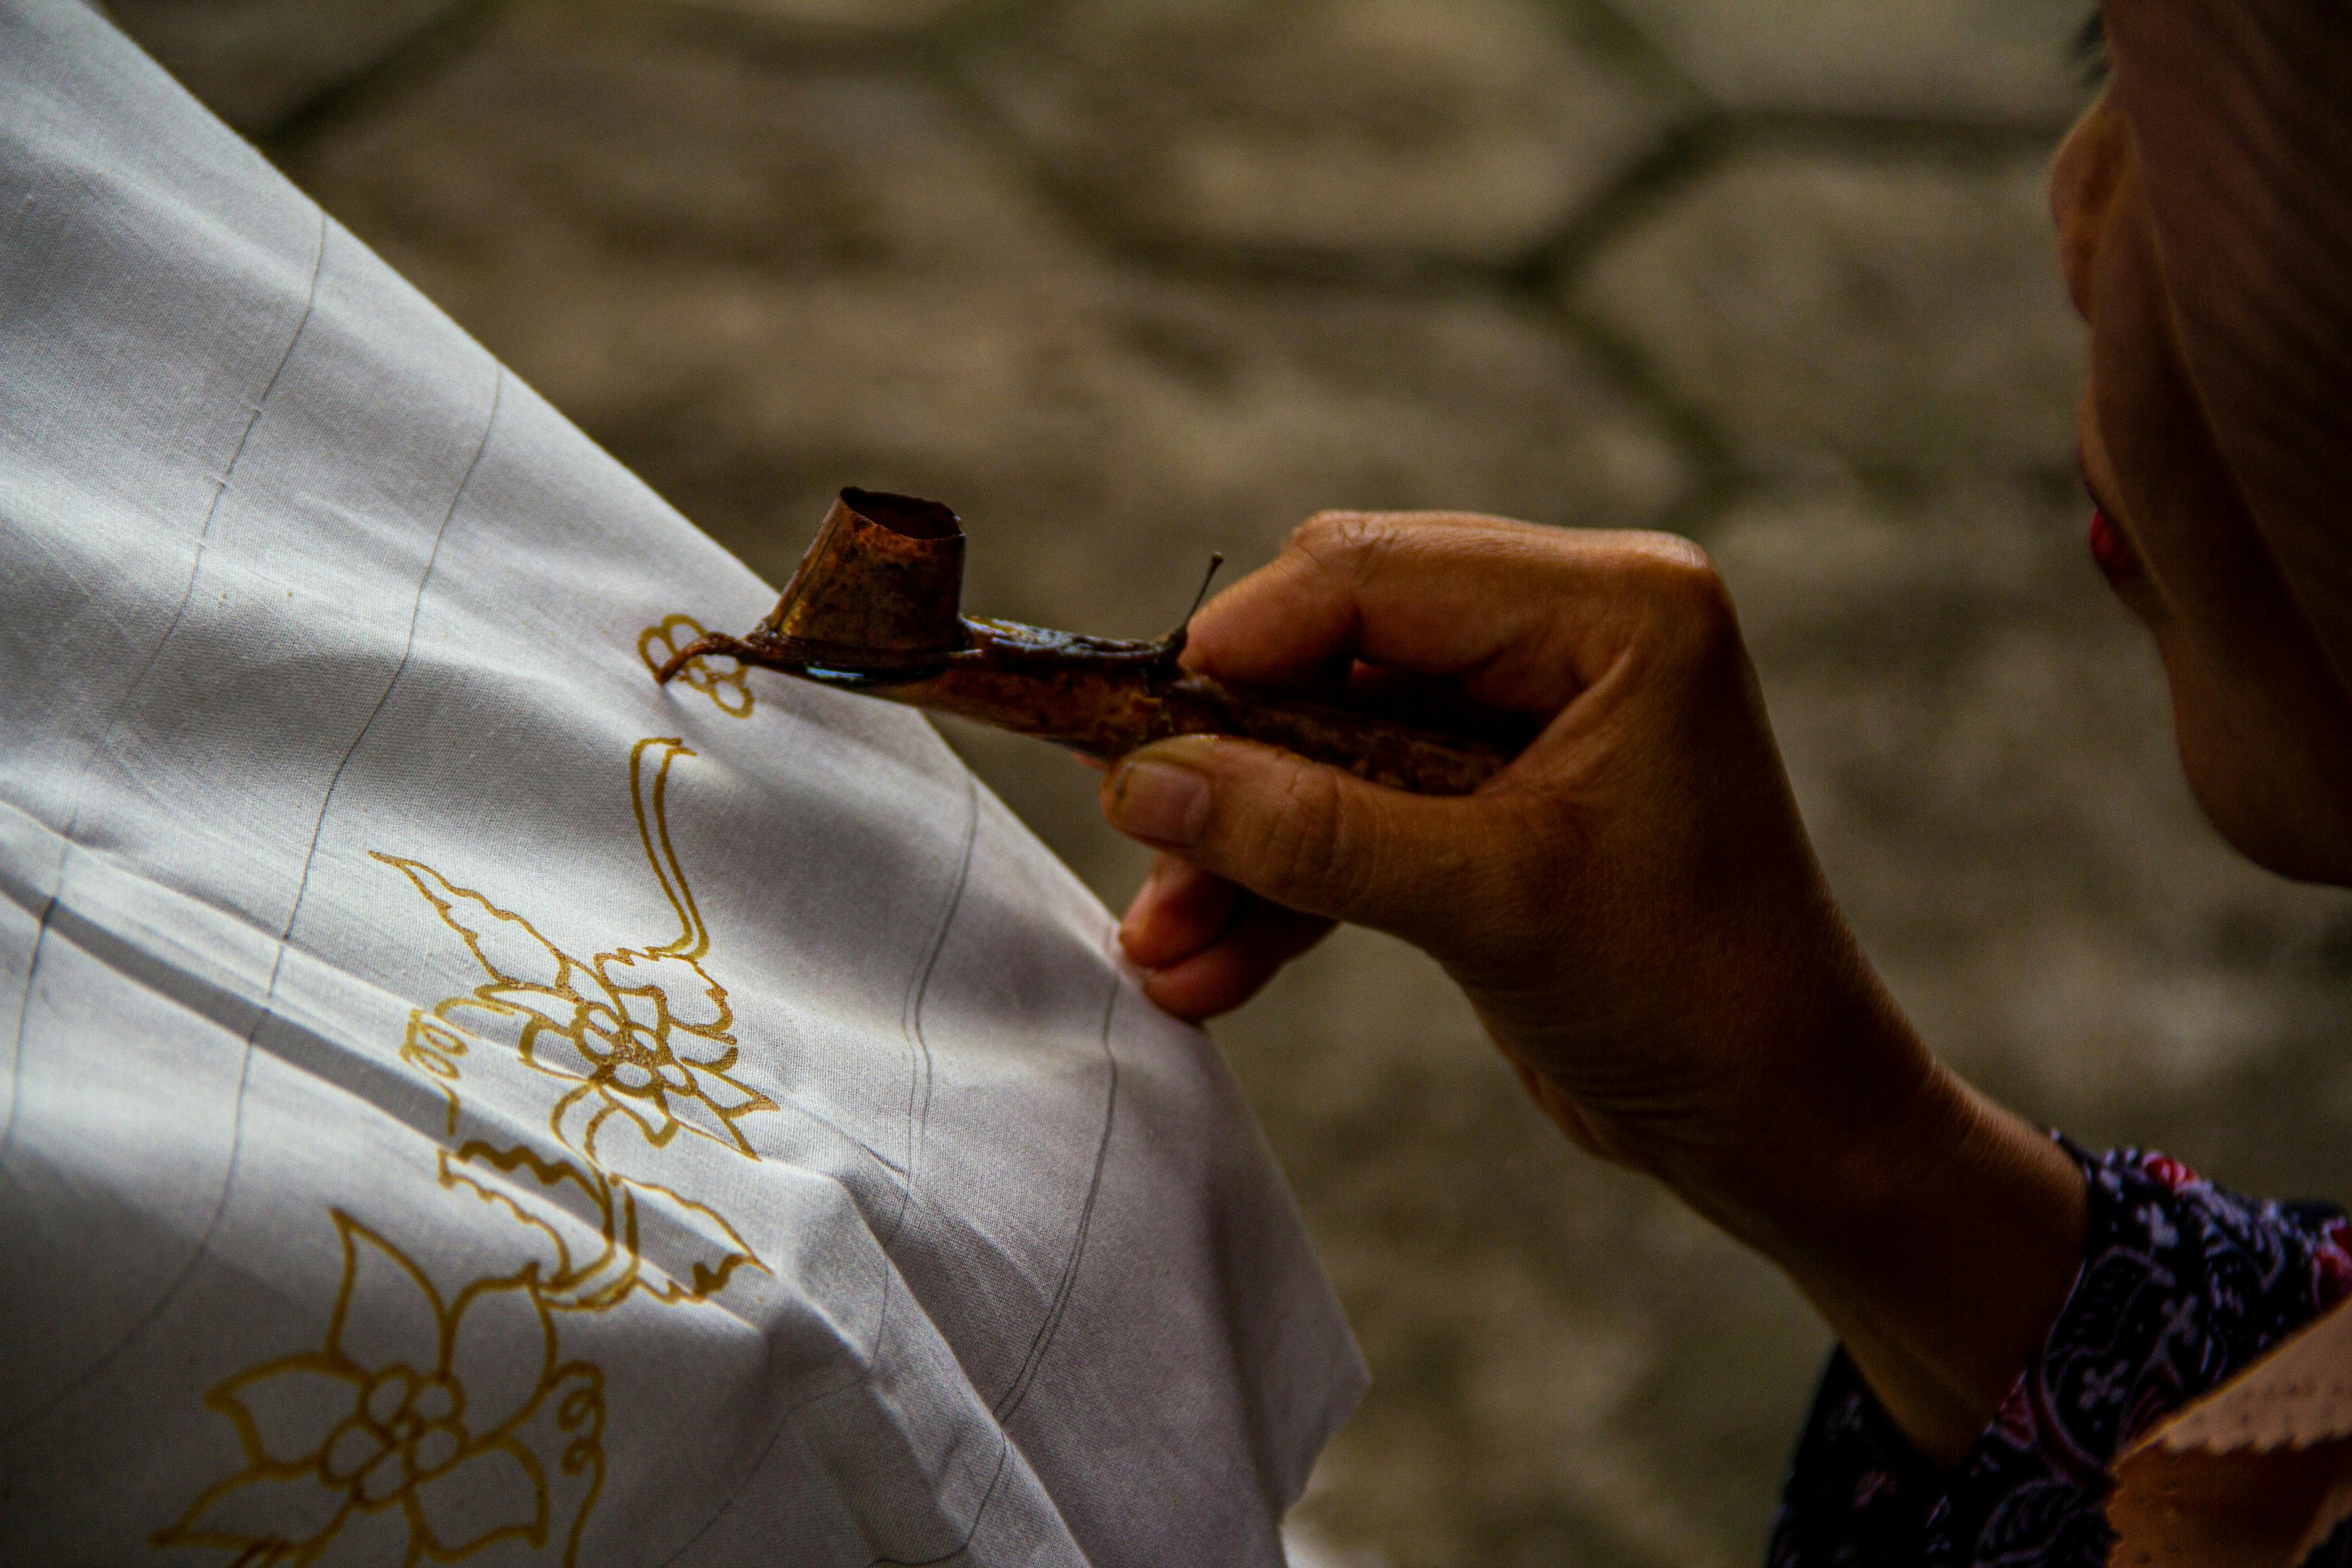 Batik is the traditional art form of applying wax to create intricate patterns on clothing